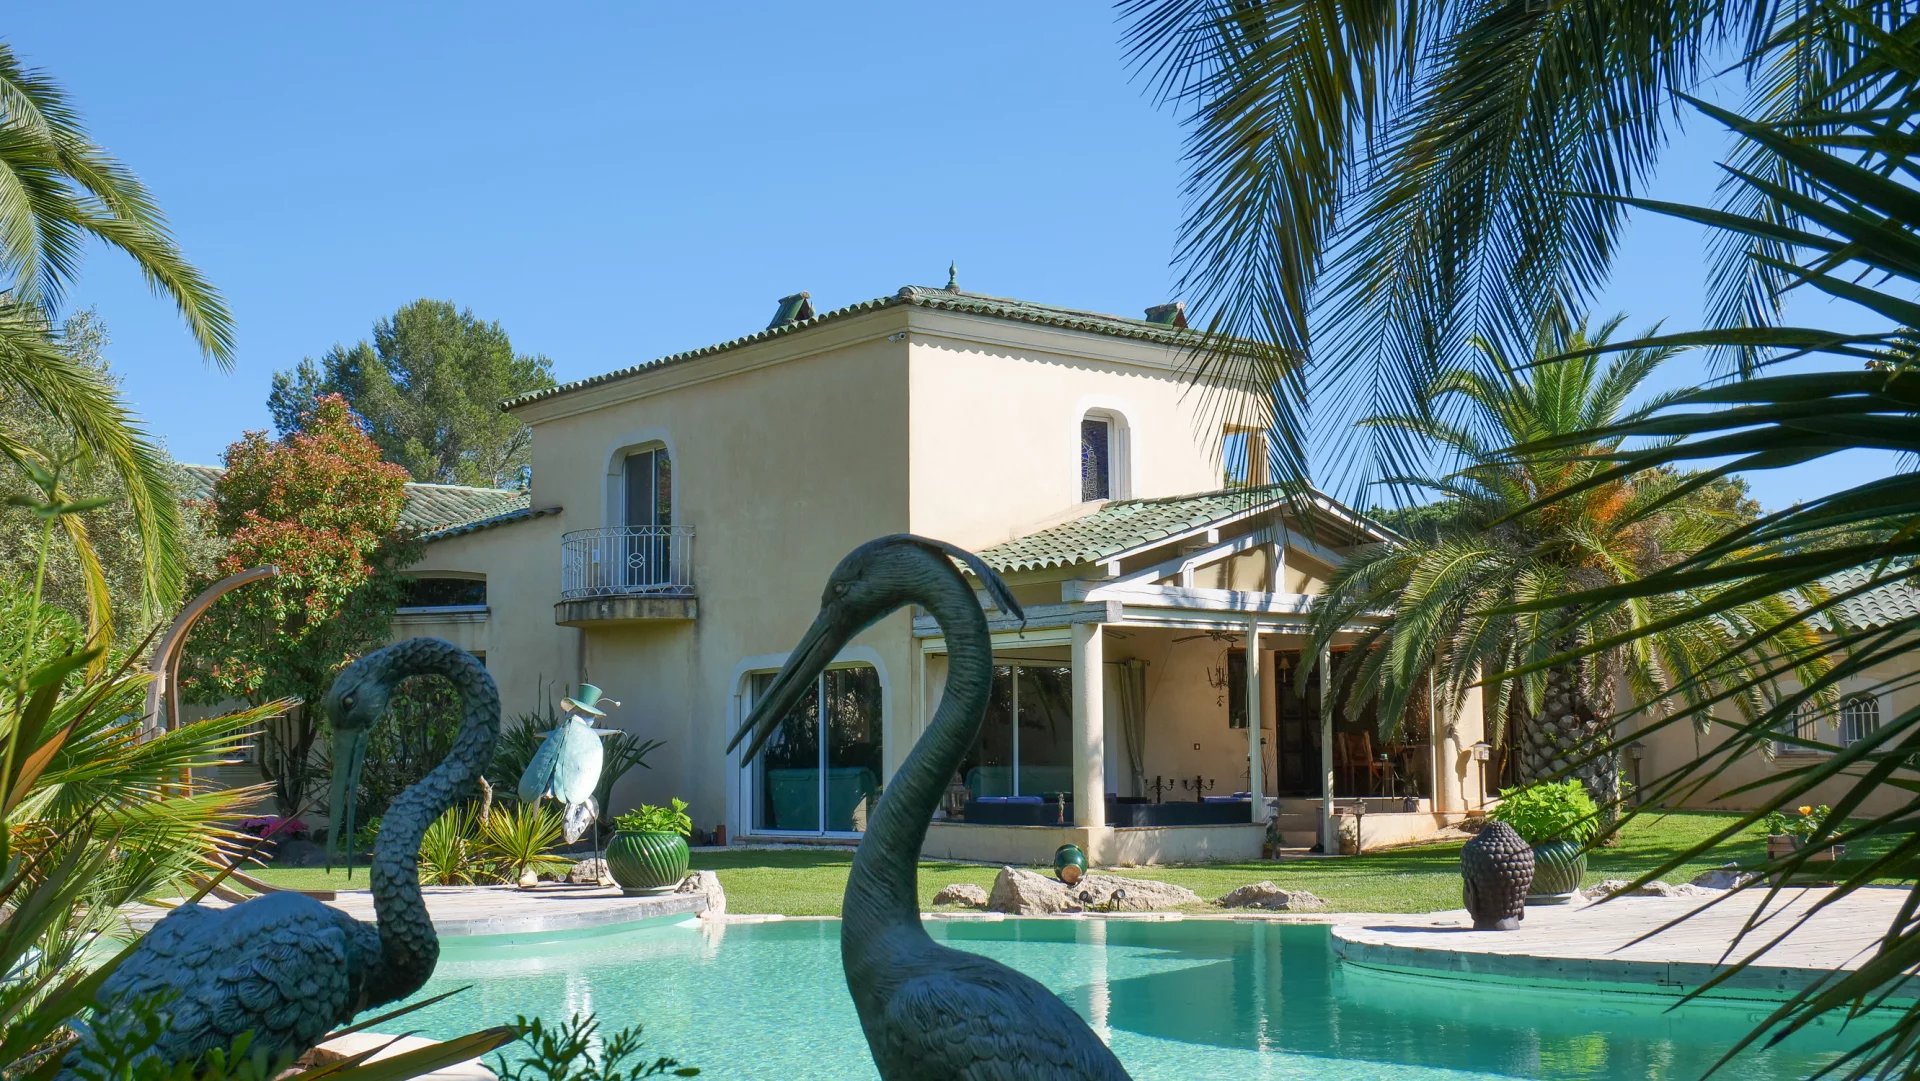 LUXURY VILLA IN A PRIVATE ESTATE AT 15 MN FROM THE BEACHES OF SAINT RAPHAEL